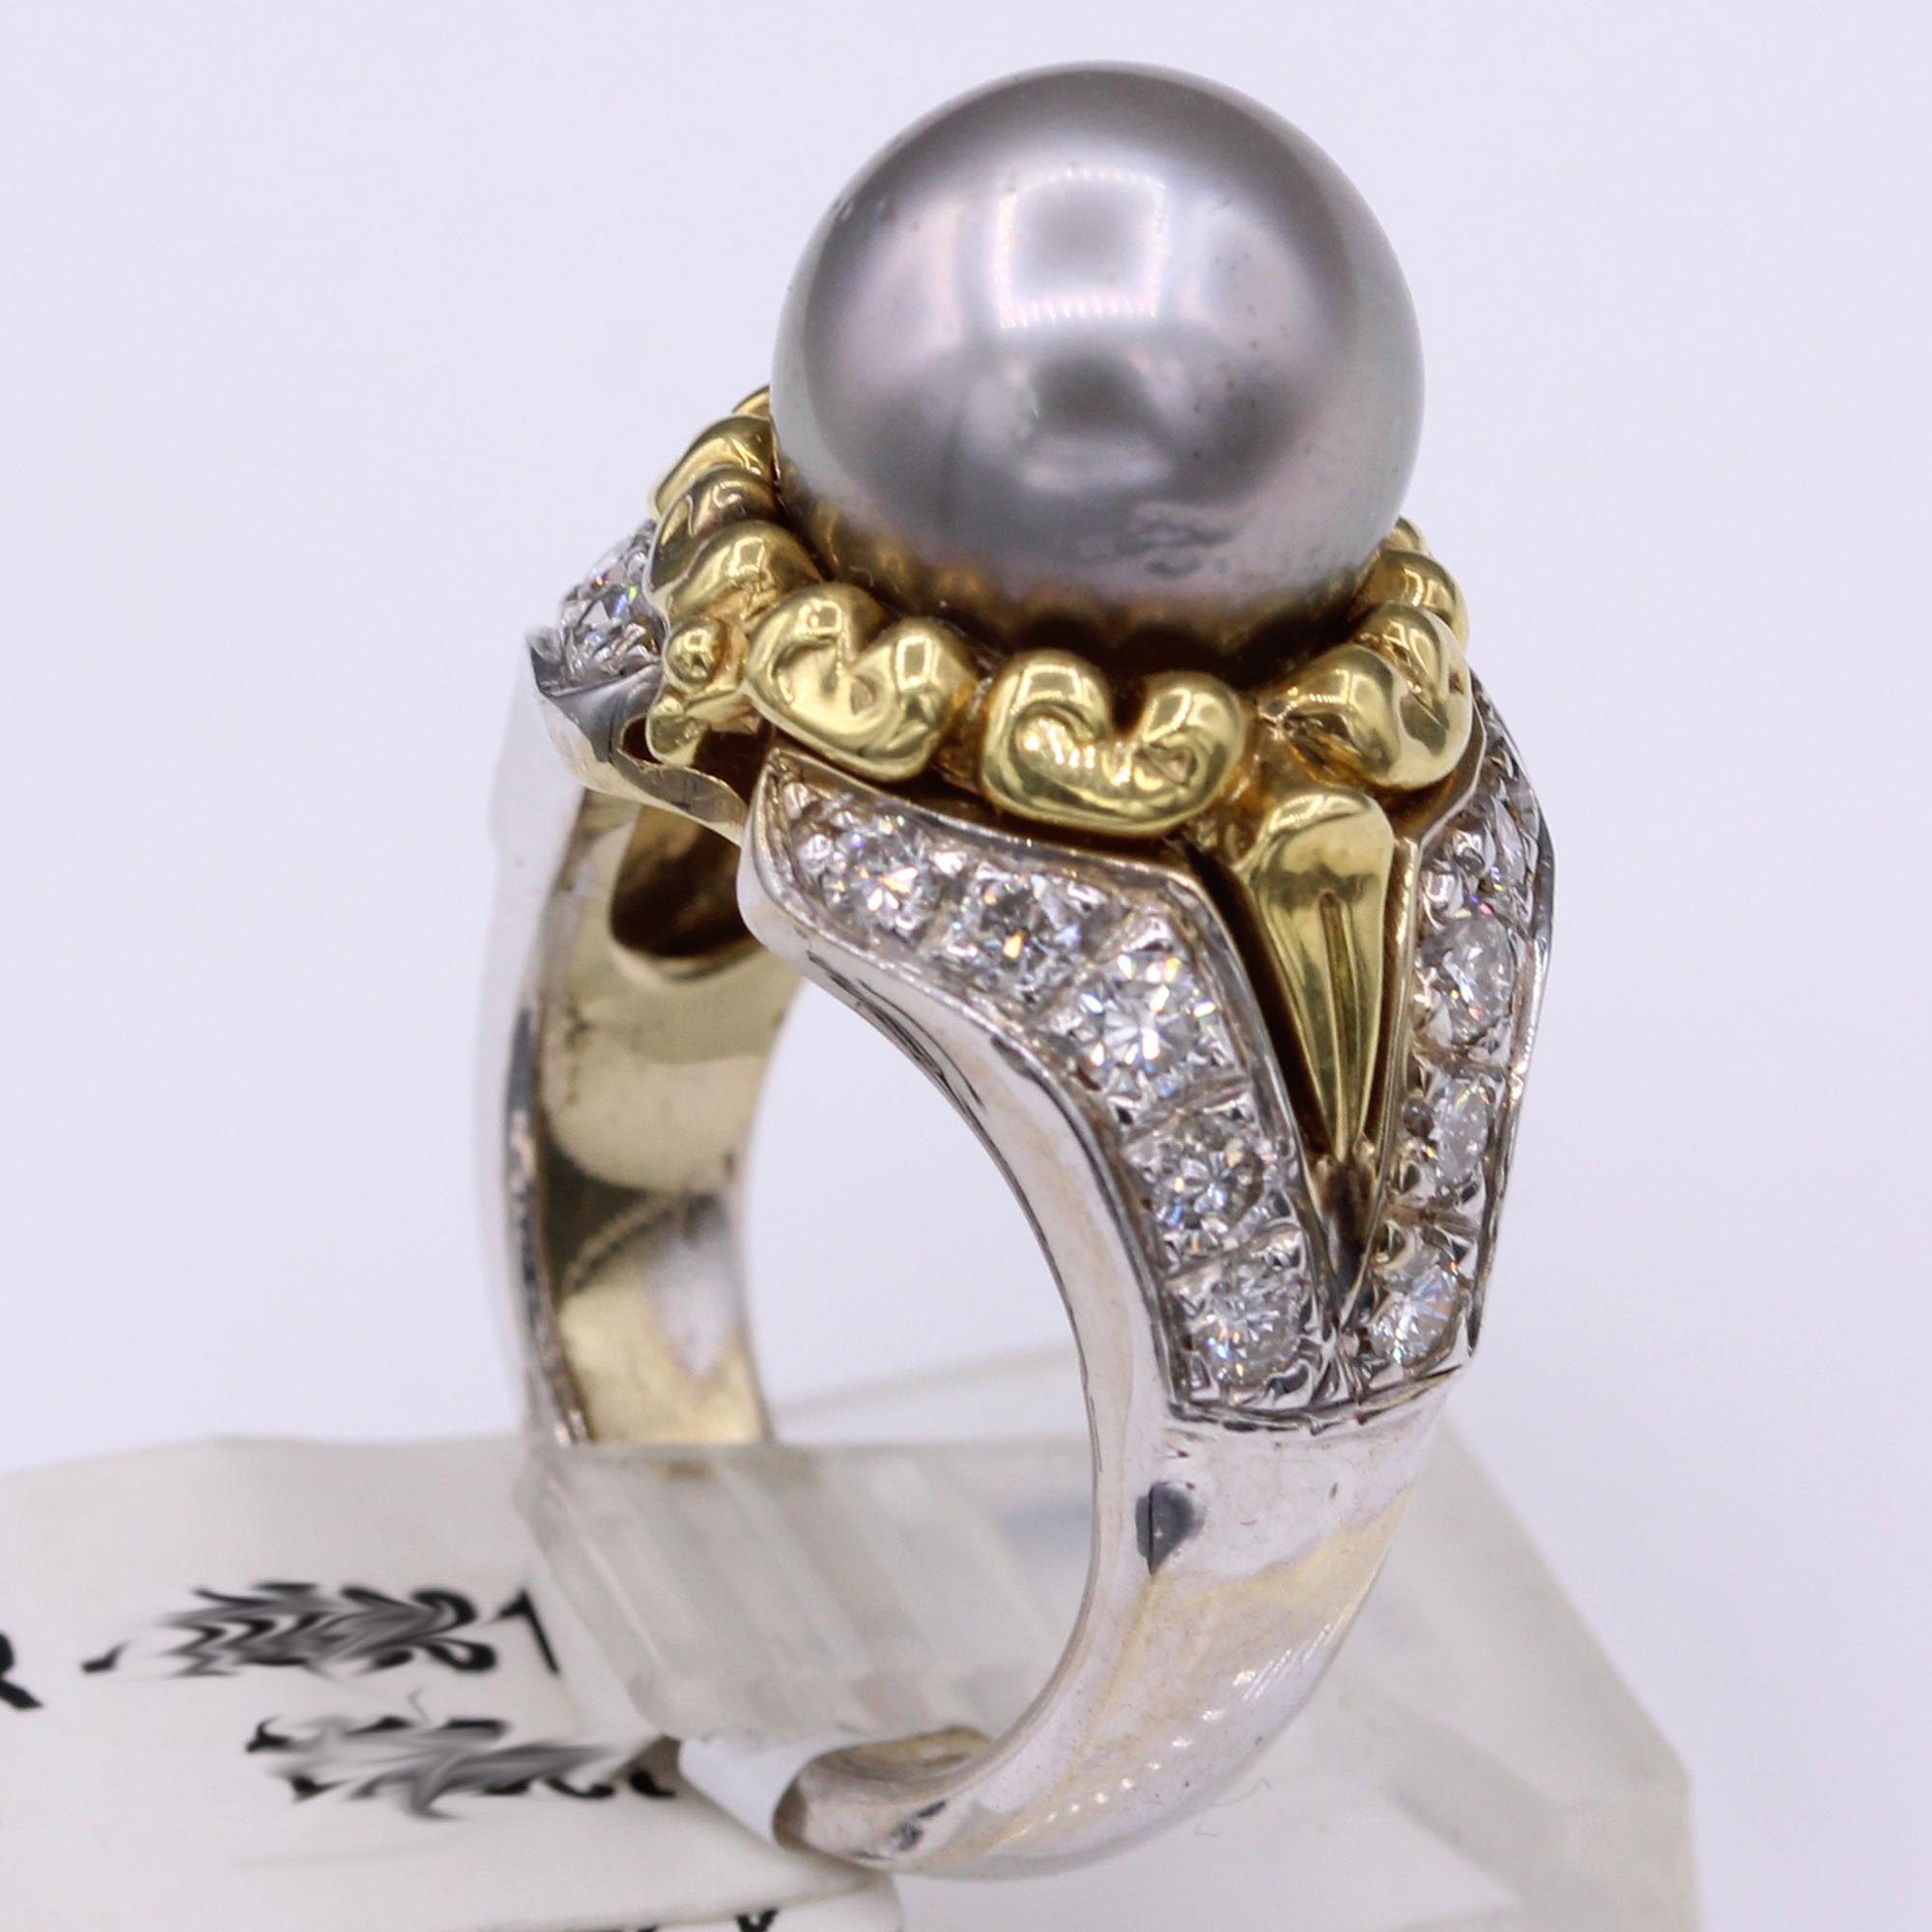 Vintage Pearl Ring 18K and Diamonds

Hight Quality - well made Tahitian Pearl Ring
Yellow & White Gold 18k 14 grams
Tahitian Pearl 11 mm nice good luster.
Natural Brilliant Diamonds Approx 1.30 carat G-VS-SI (very nice sparkly diamonds)
Finger size